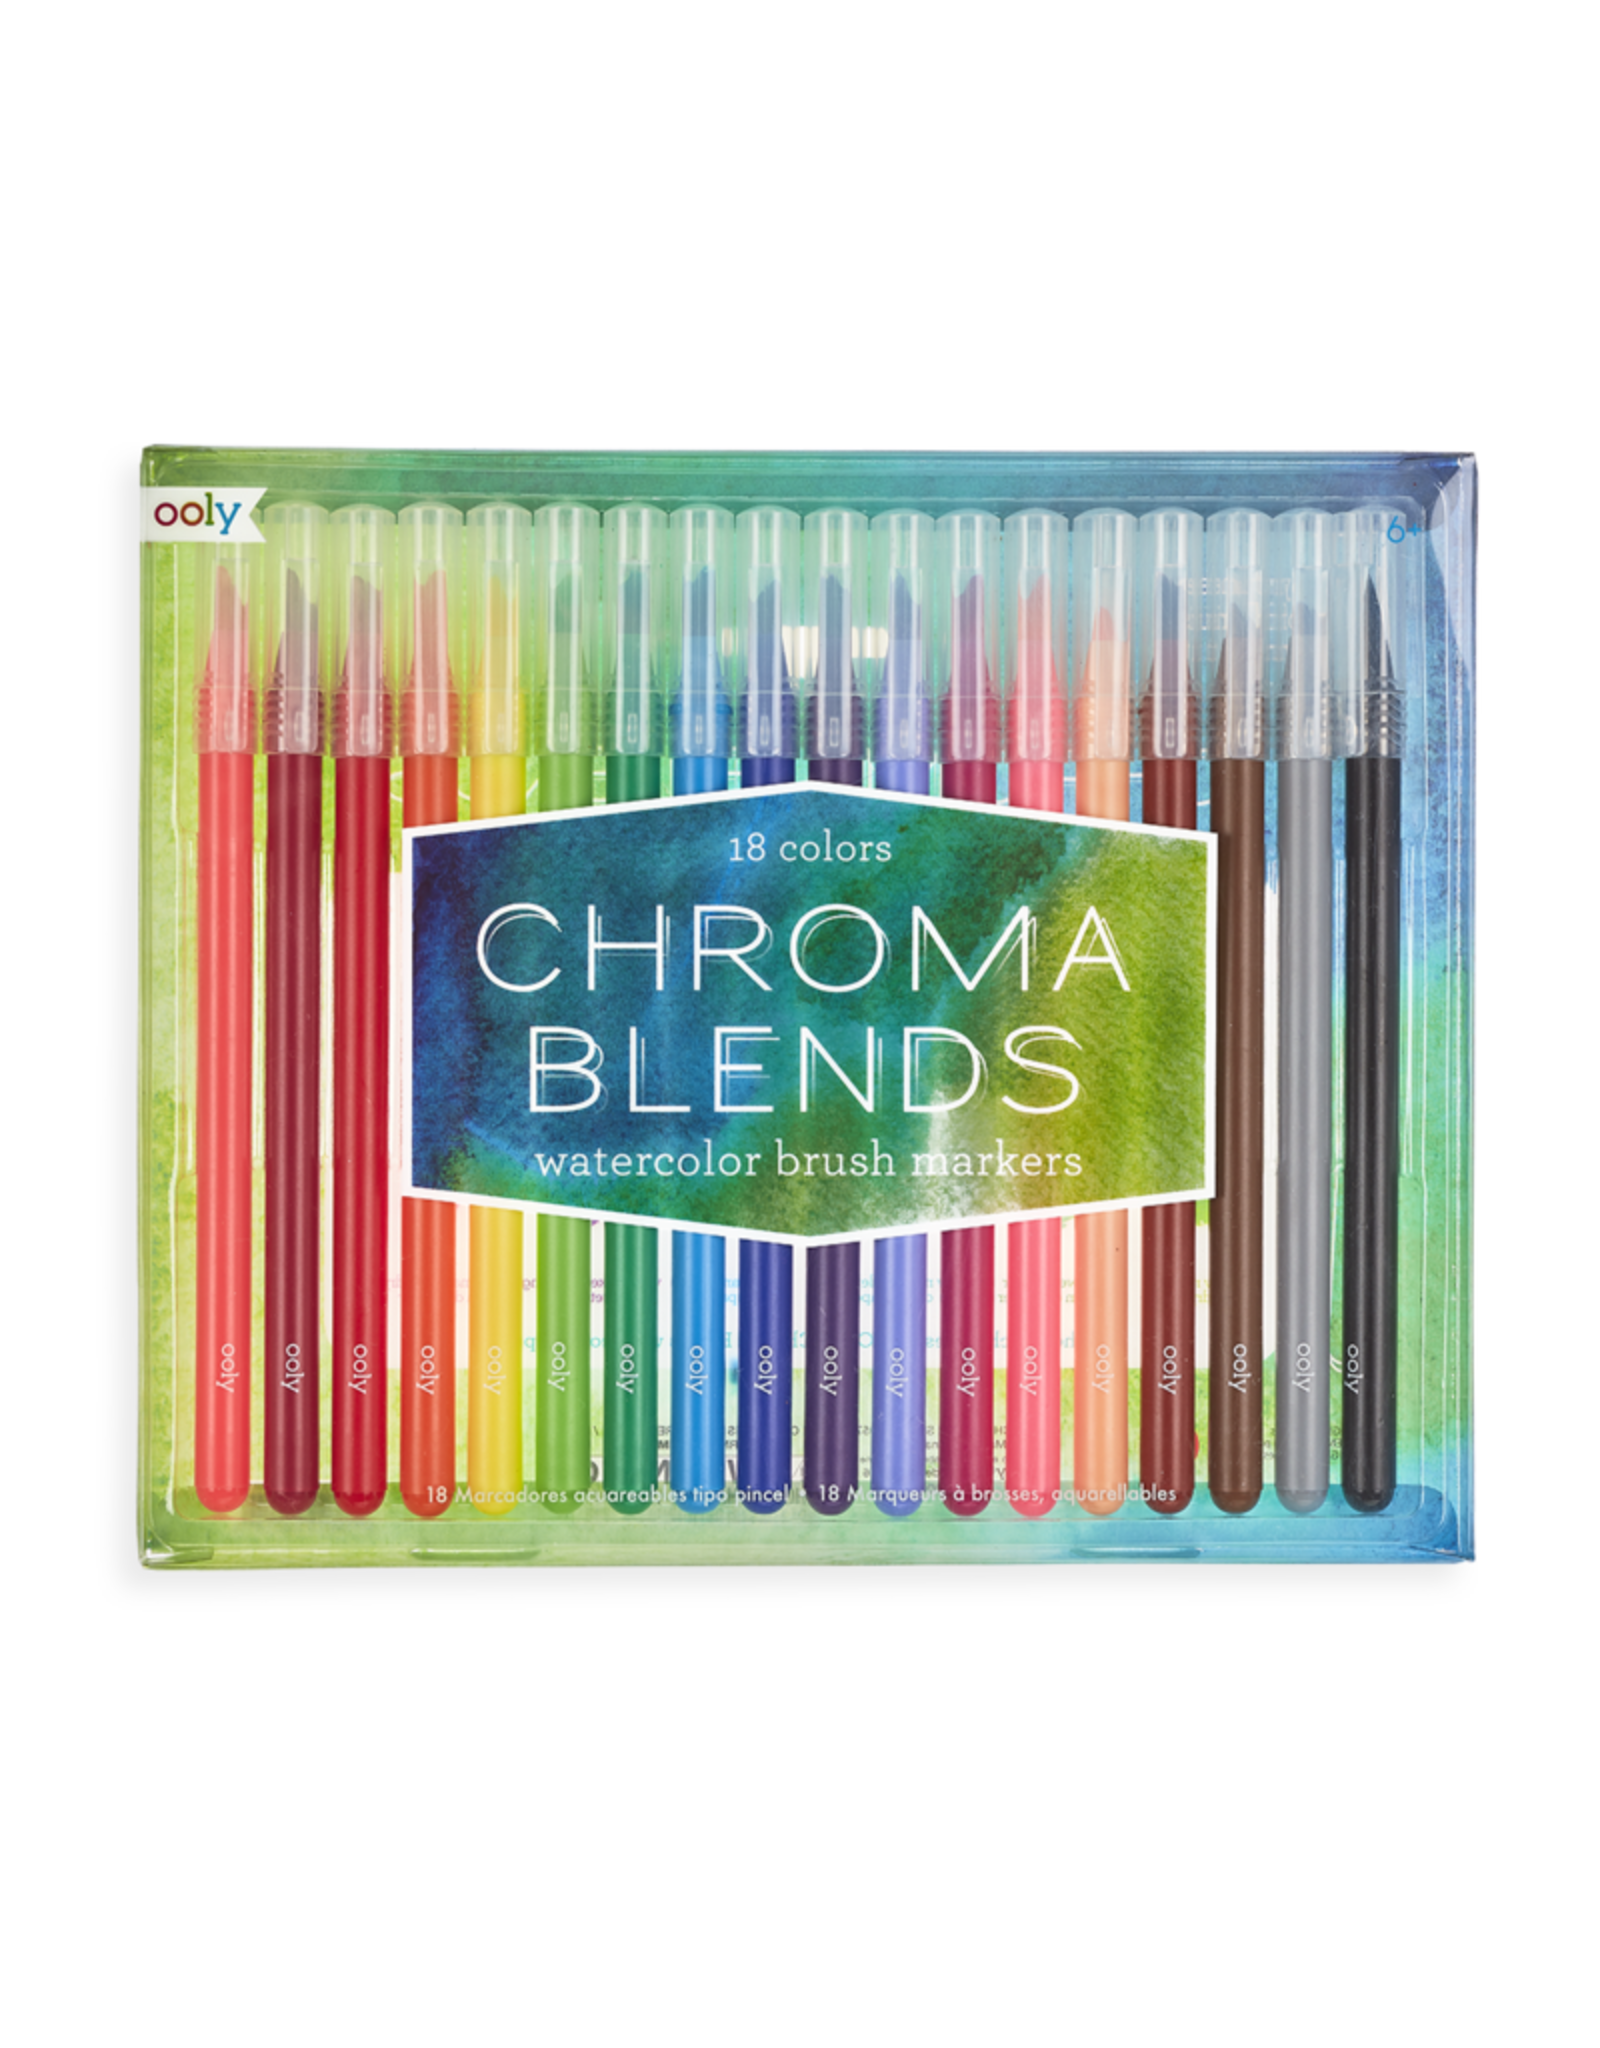 Ooly Chroma Blends Watercolor Brush Markers - 18 pc